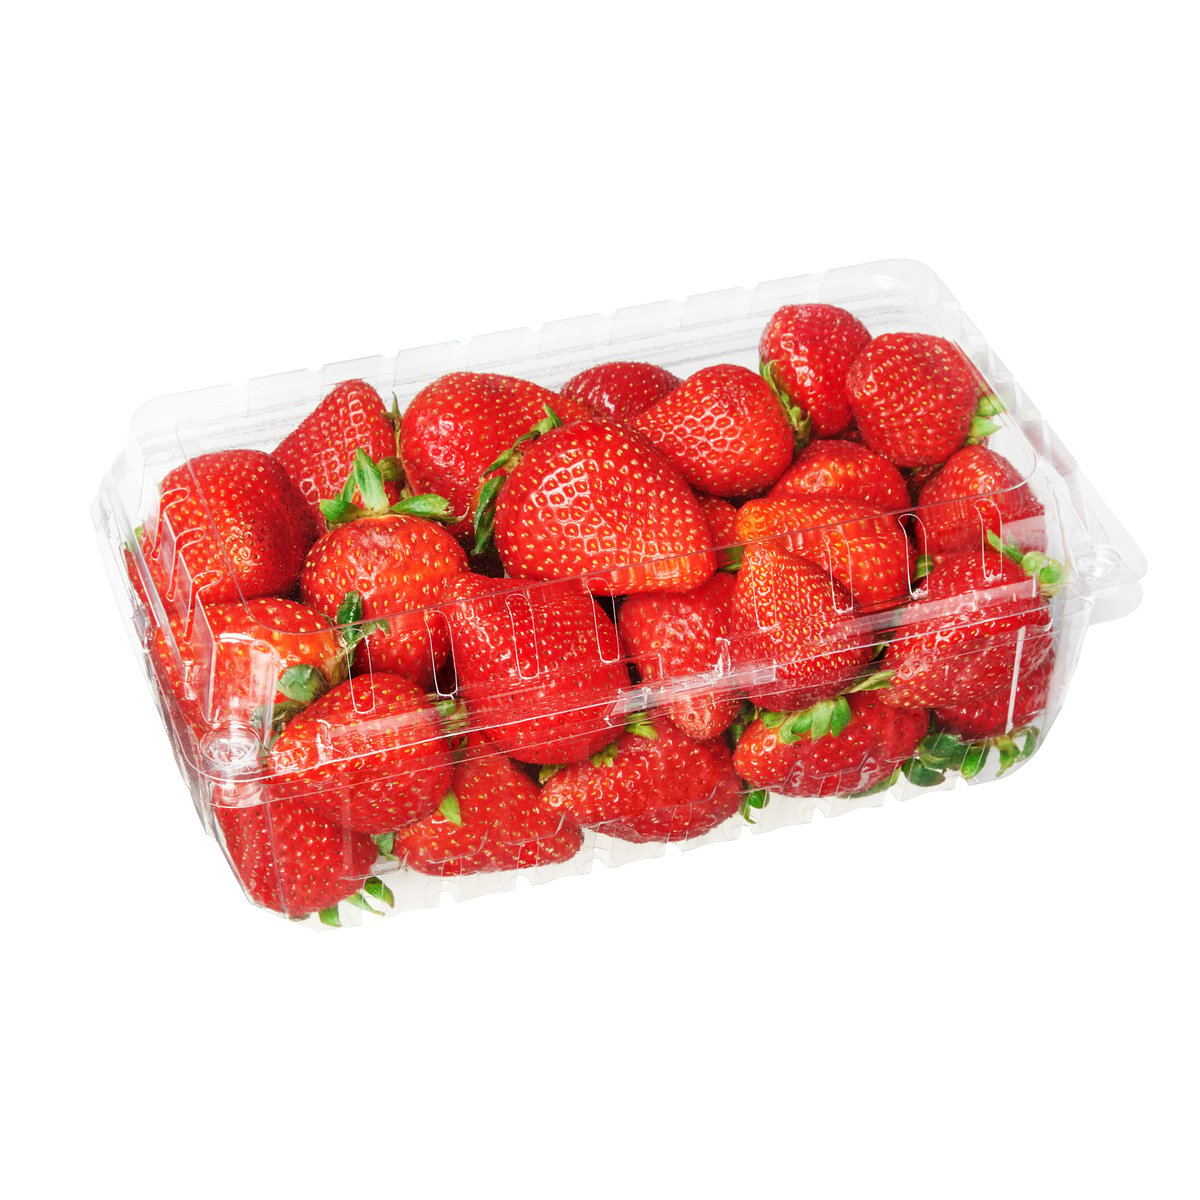 Strawberi Import ( Strawberry Imported ) Packet 250g Approx. Weight